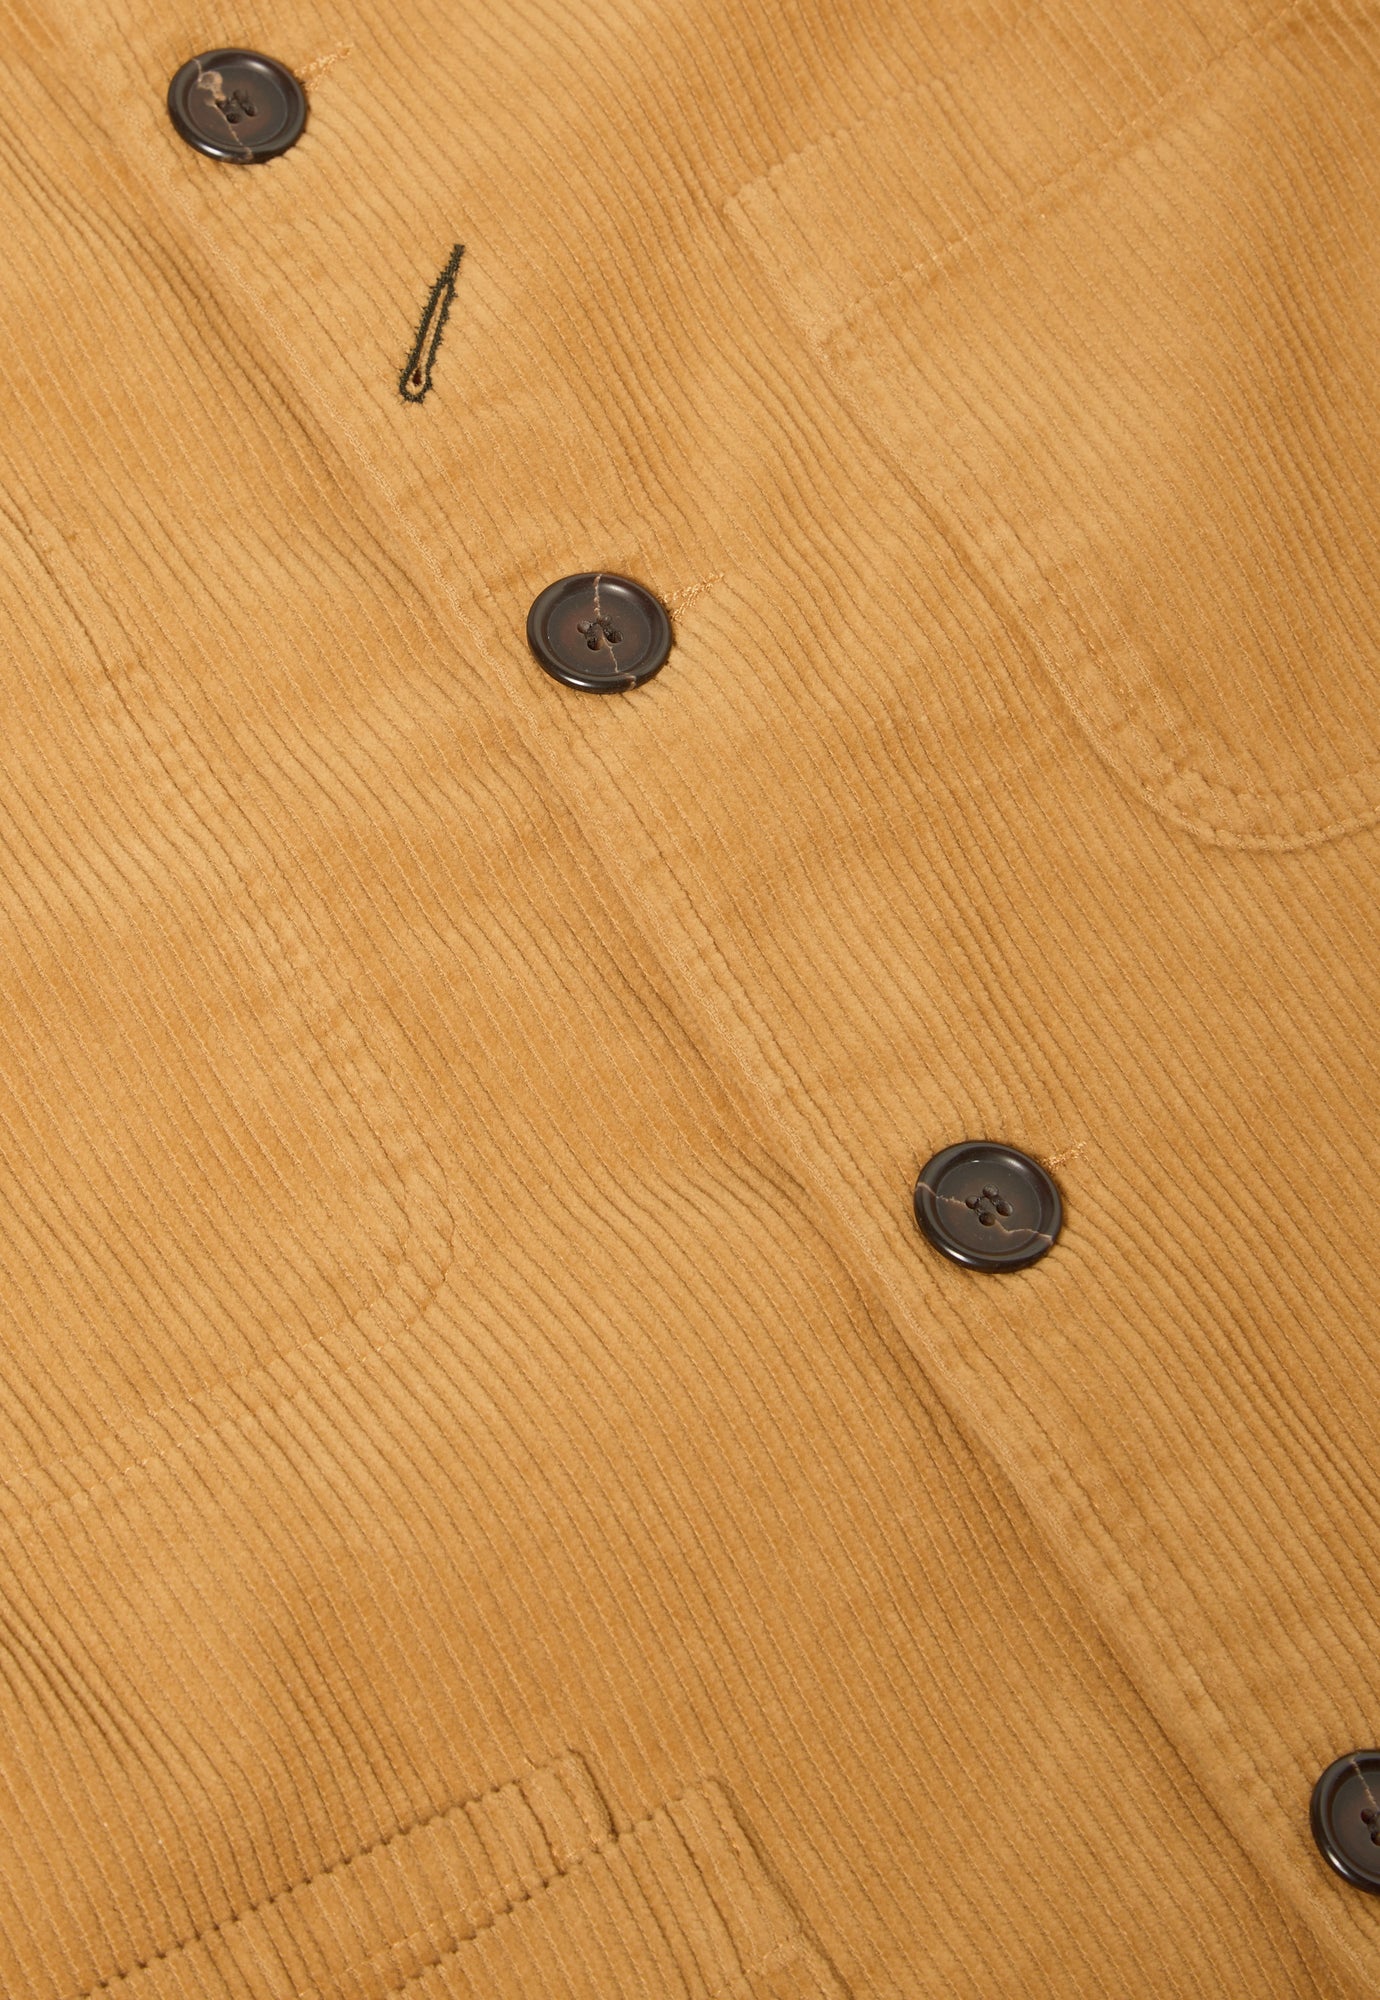 Universal Works Bakers Jacket in Corn Cord